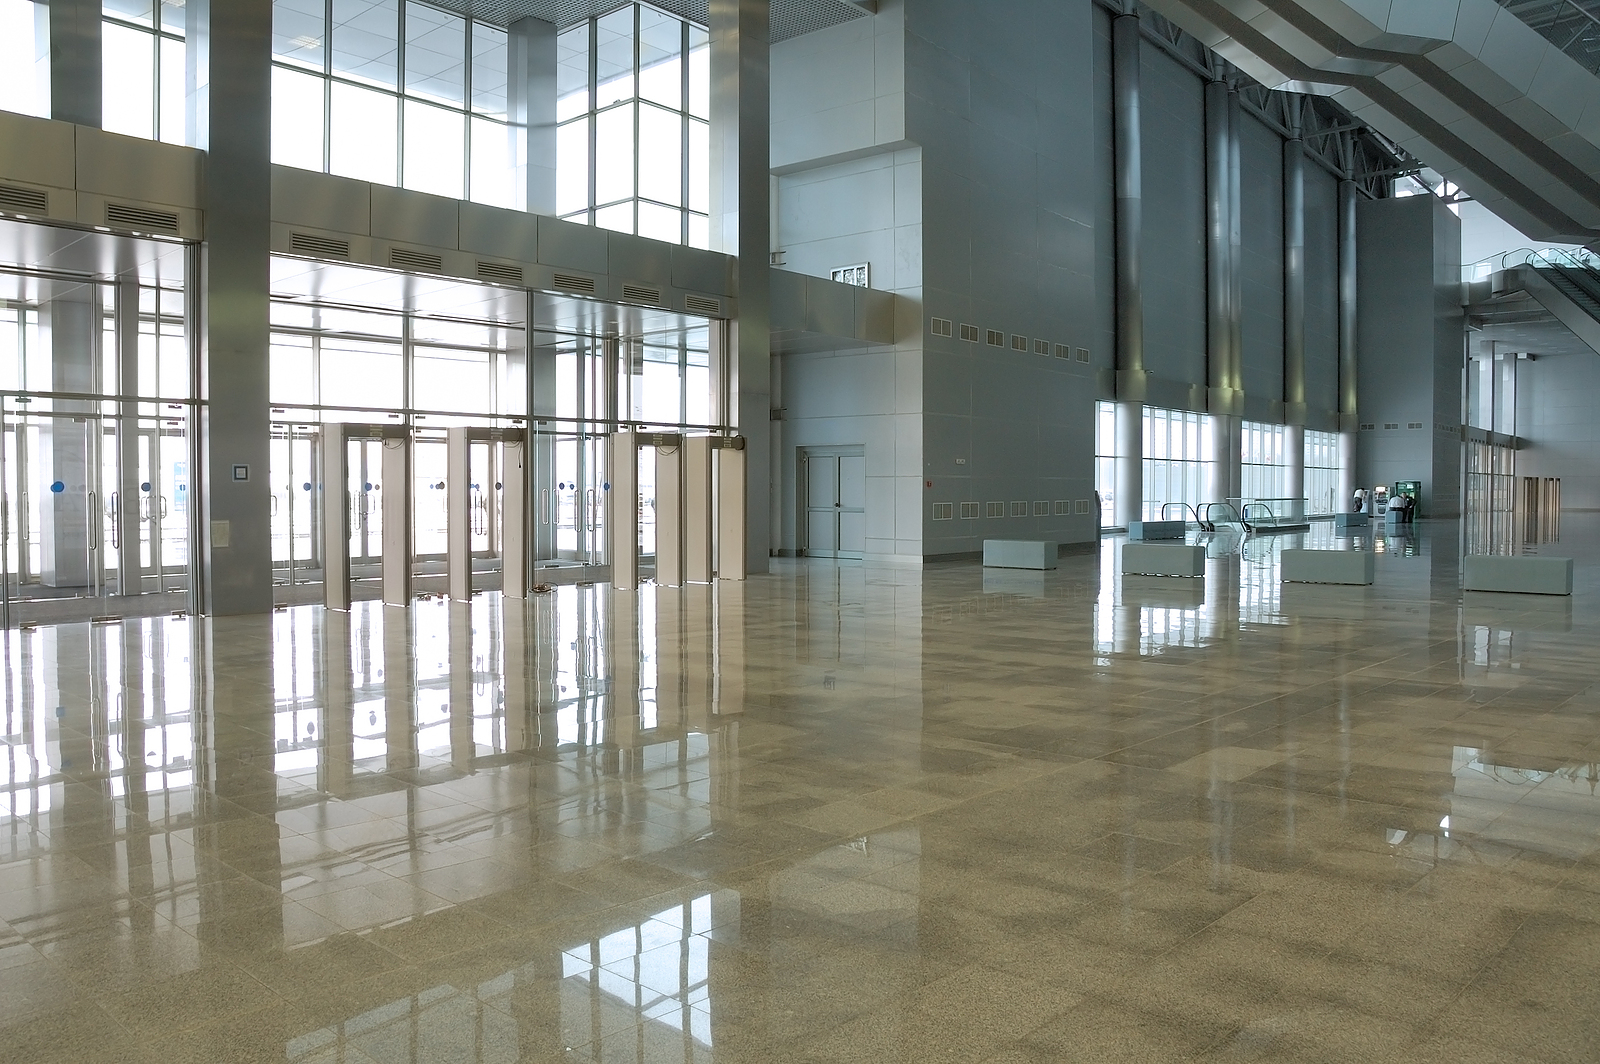 How to maintain your flooring in high-traffic areas